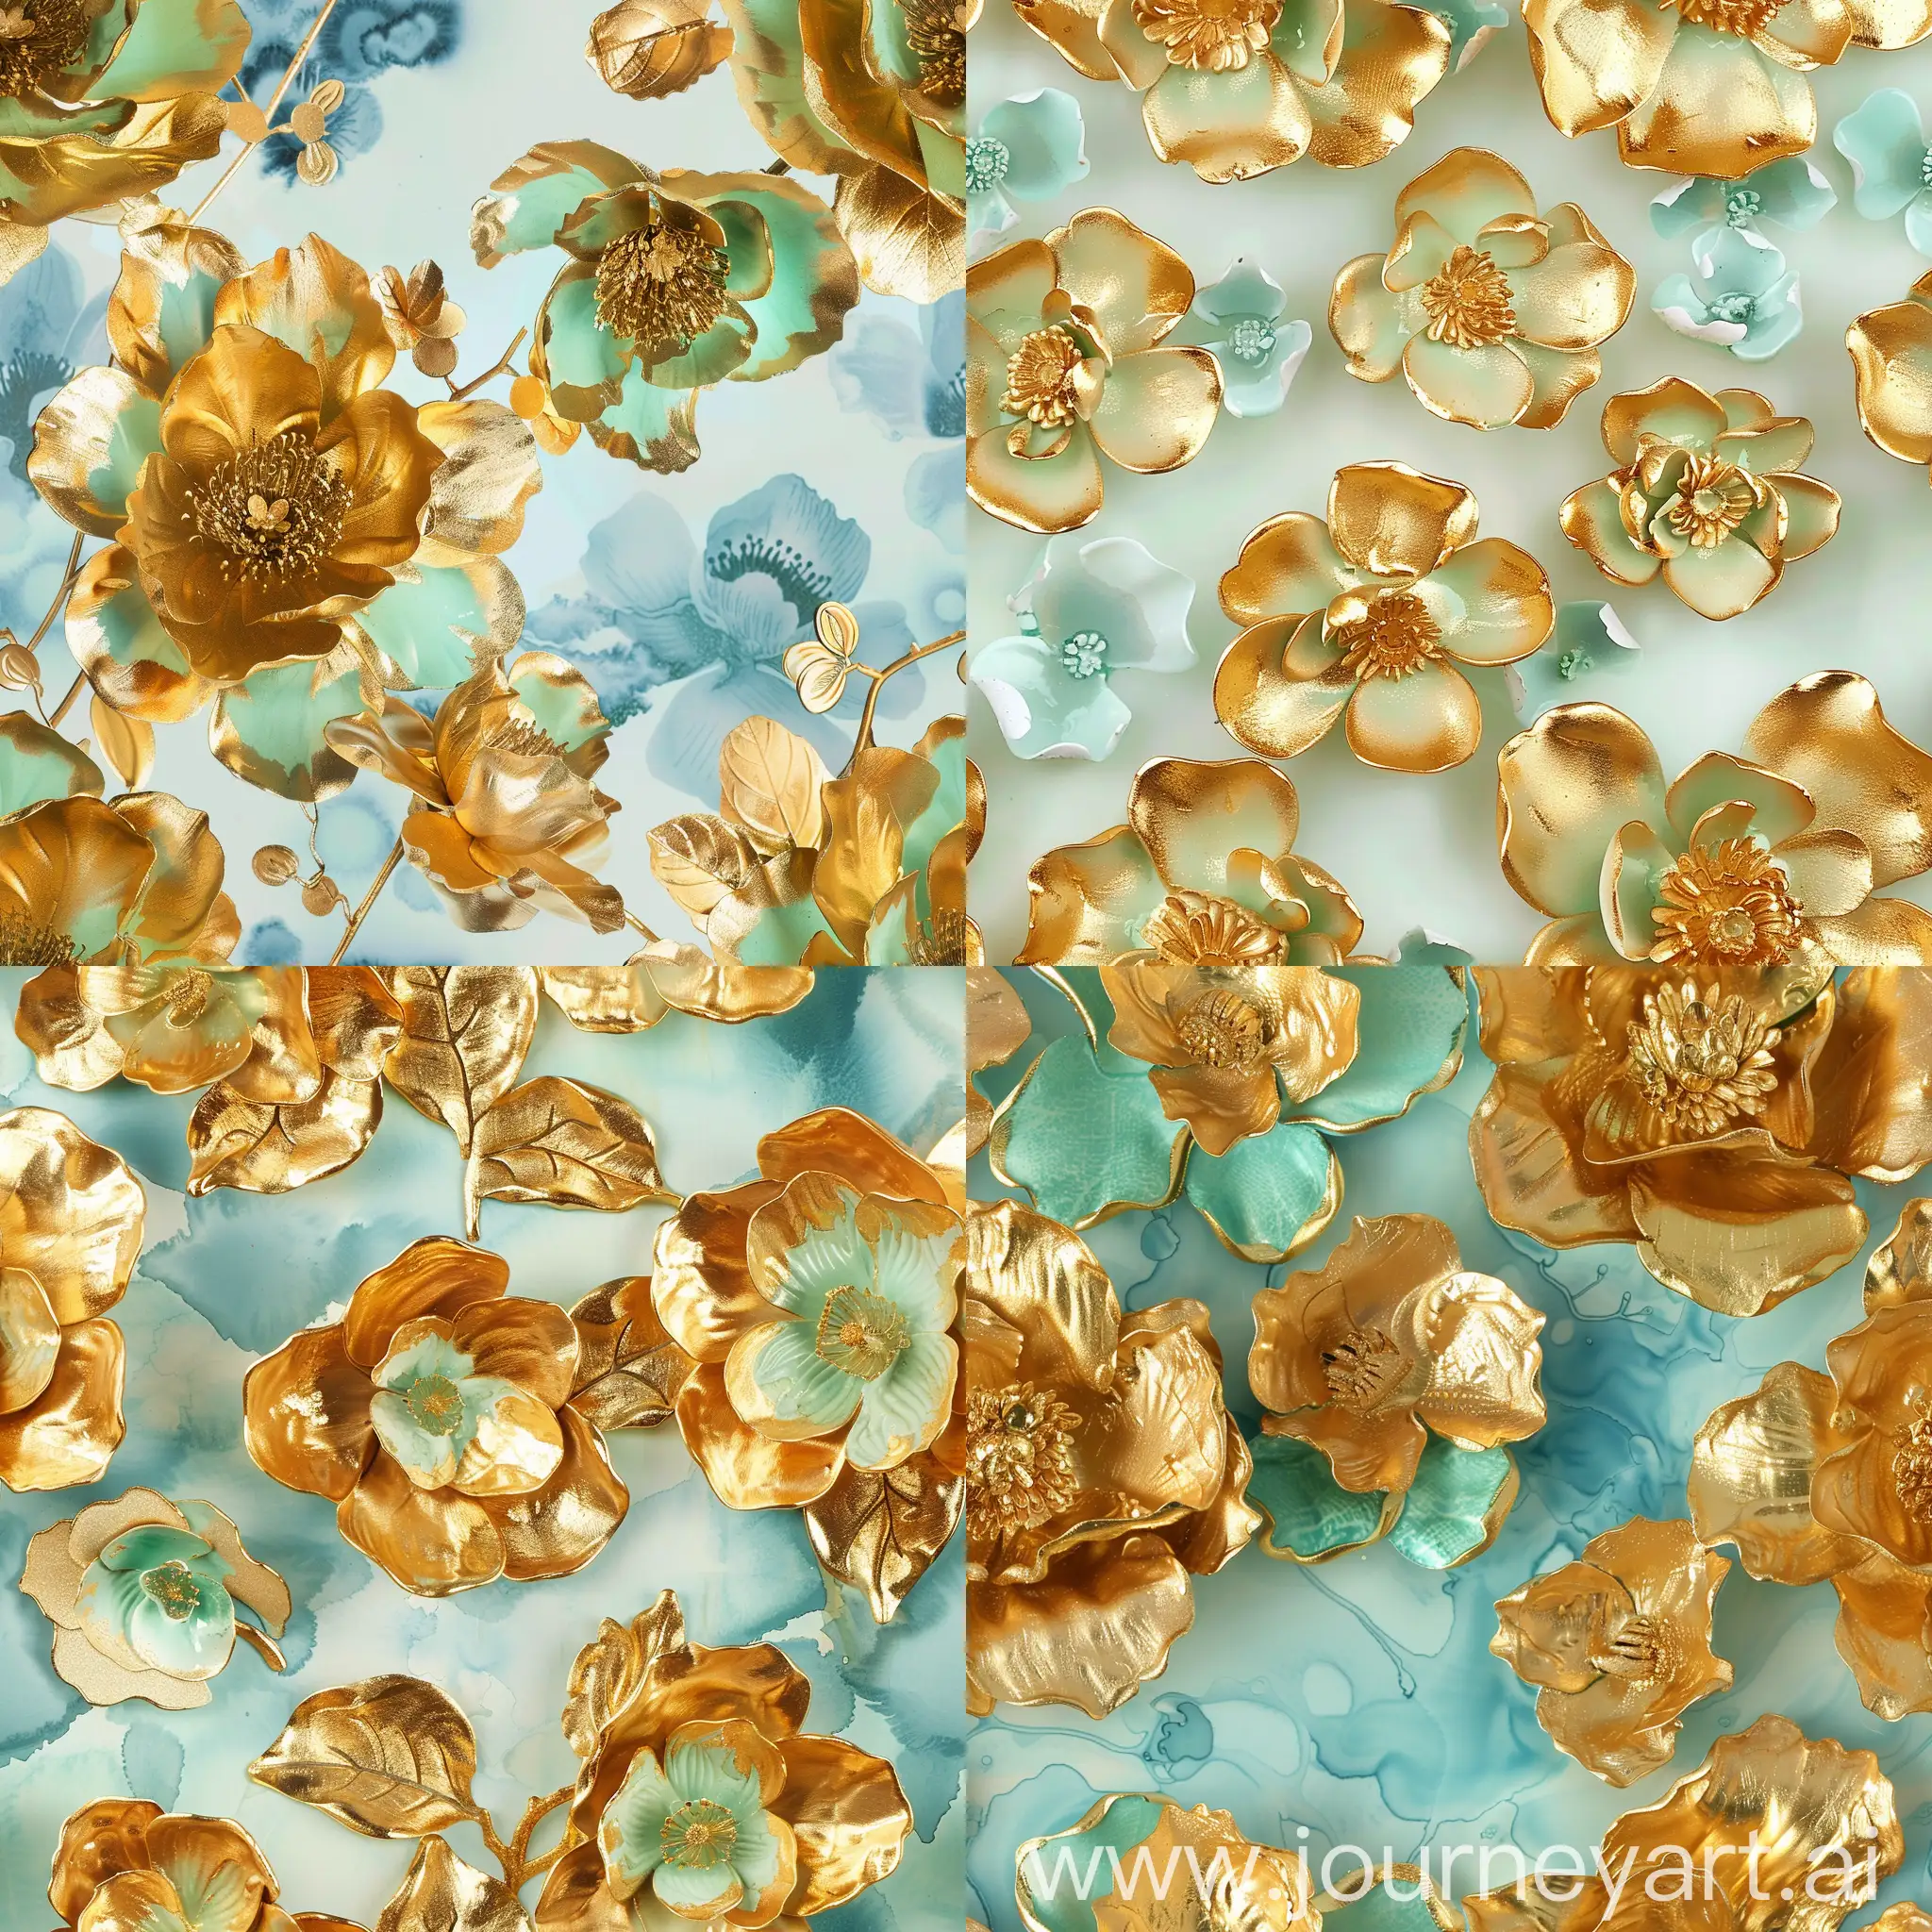 Exquisite-Renaissance-Style-Gilded-Flowers-with-Mint-Green-Petals-and-Chinese-Azure-Blue-Ink